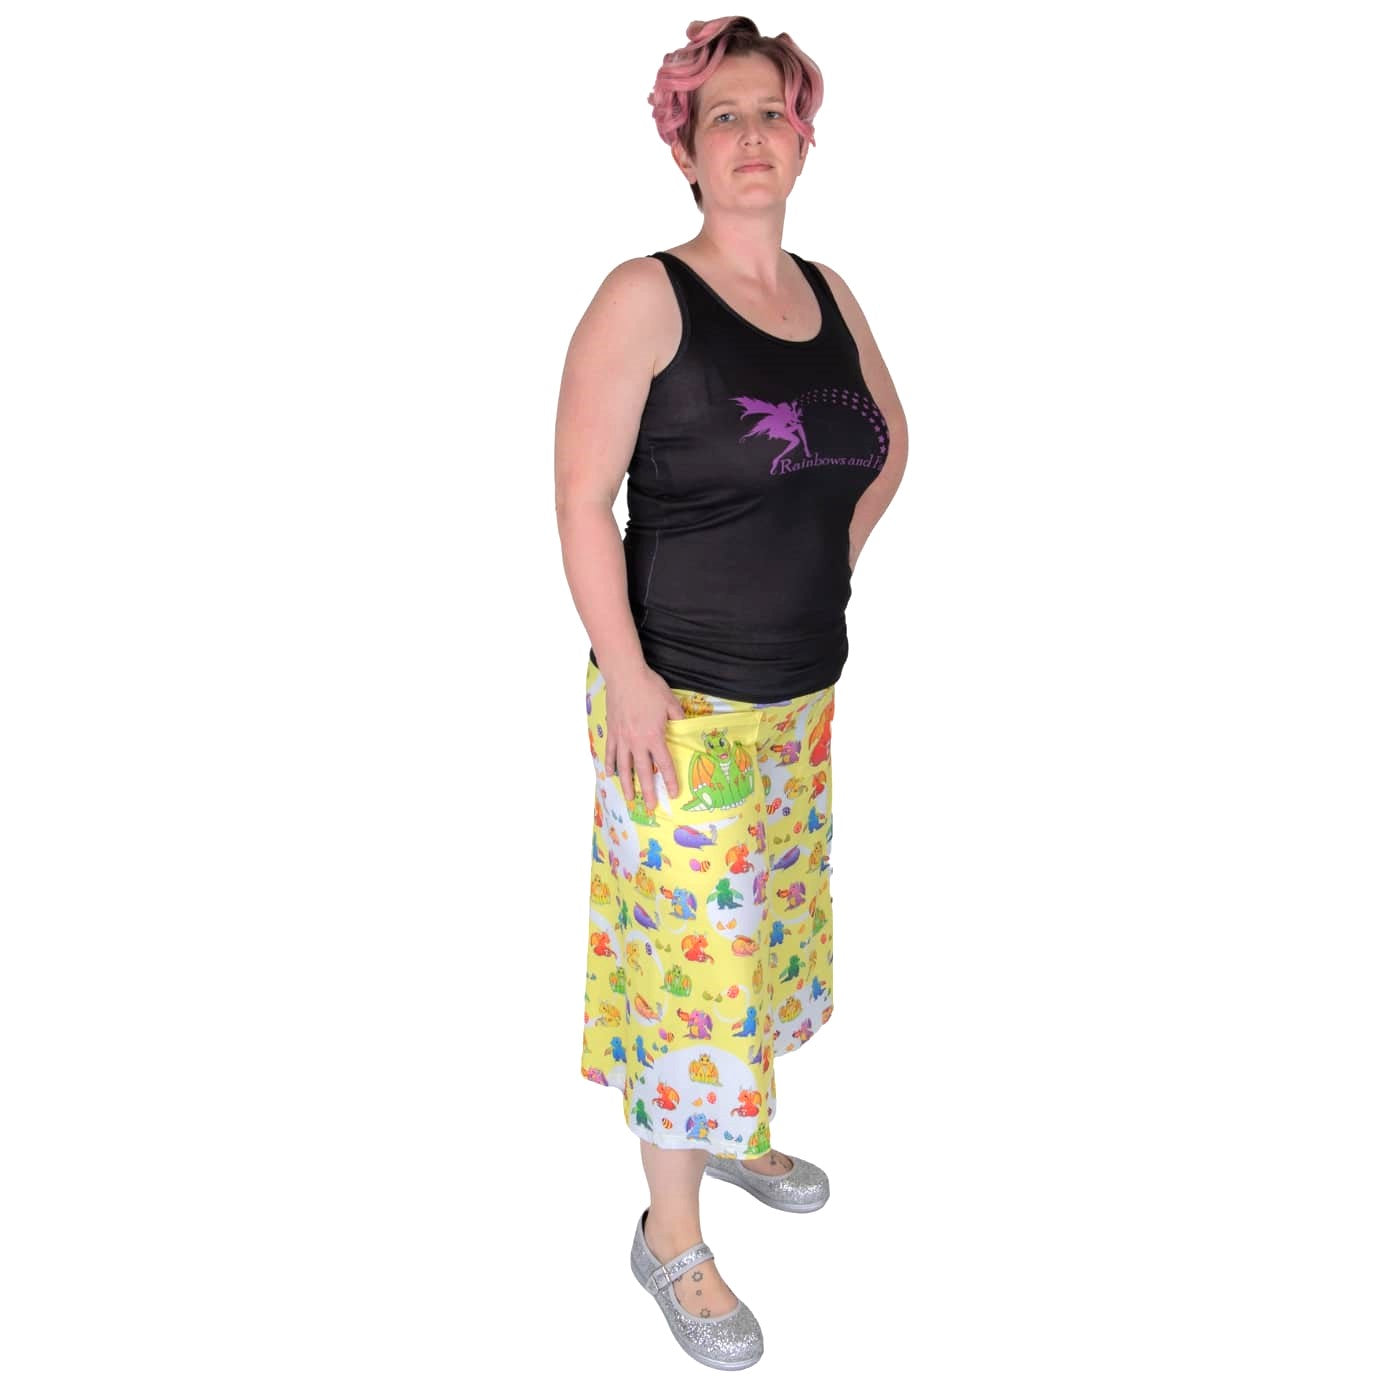 Brood Culottes by RainbowsAndFairies.com.au (Dragons - Vintage - Baby Dragon - Wide Leg Pants - Pokemon Inspired - 3 Quarter Pants - Kitsch) - SKU: CL_CULTS_BROOD_ORG - Pic-05